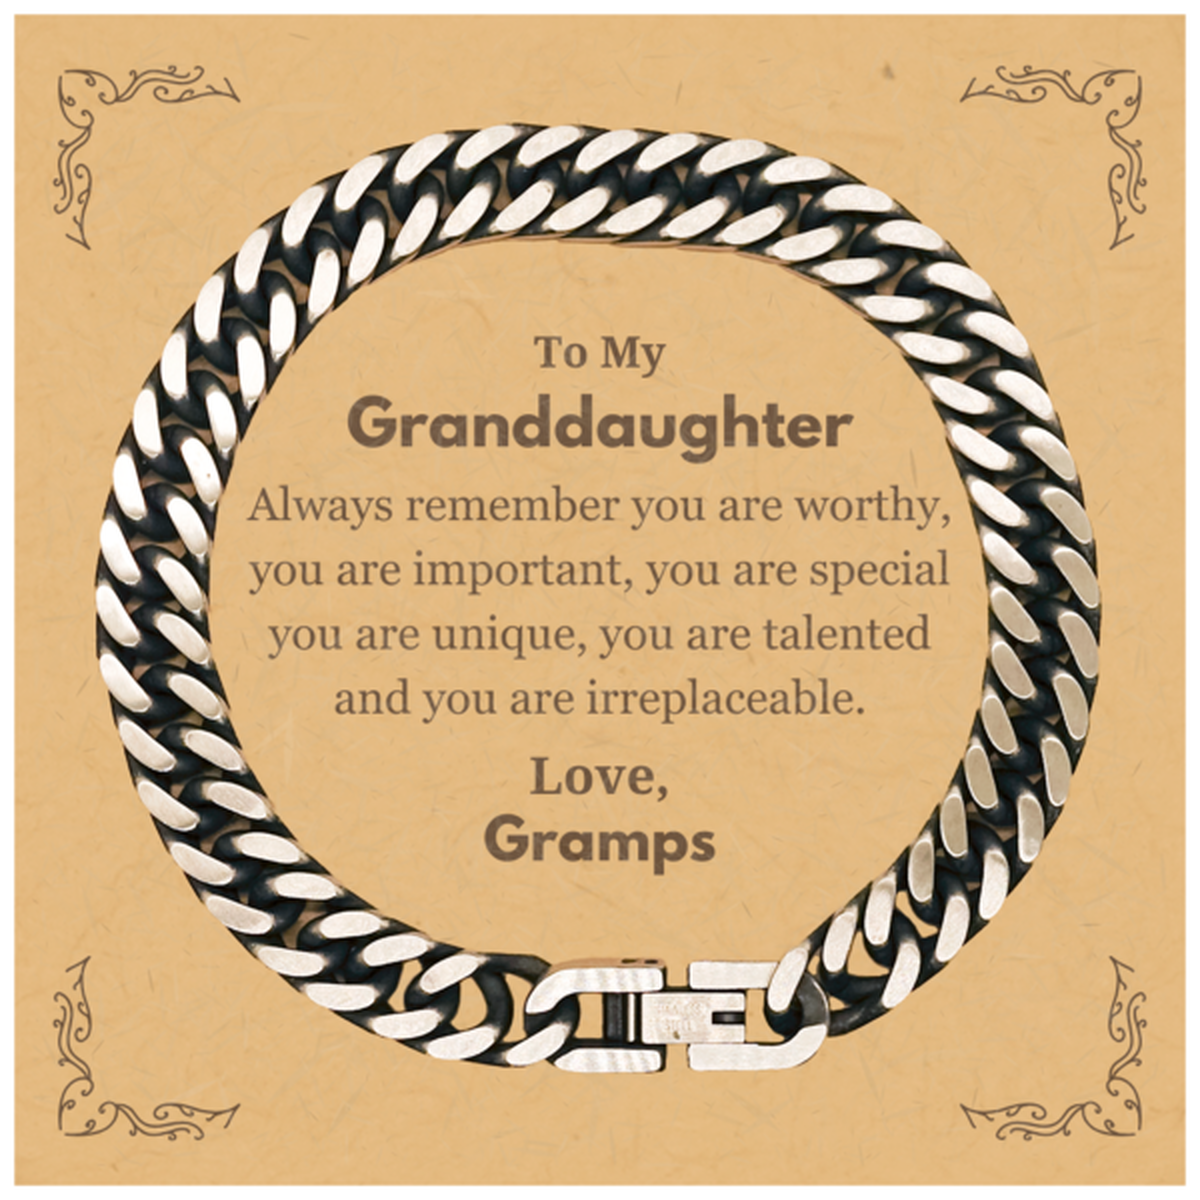 Granddaughter Birthday Gifts from Gramps, Inspirational Cuban Link Chain Bracelet for Granddaughter Christmas Graduation Gifts for Granddaughter Always remember you are worthy, you are important. Love, Gramps